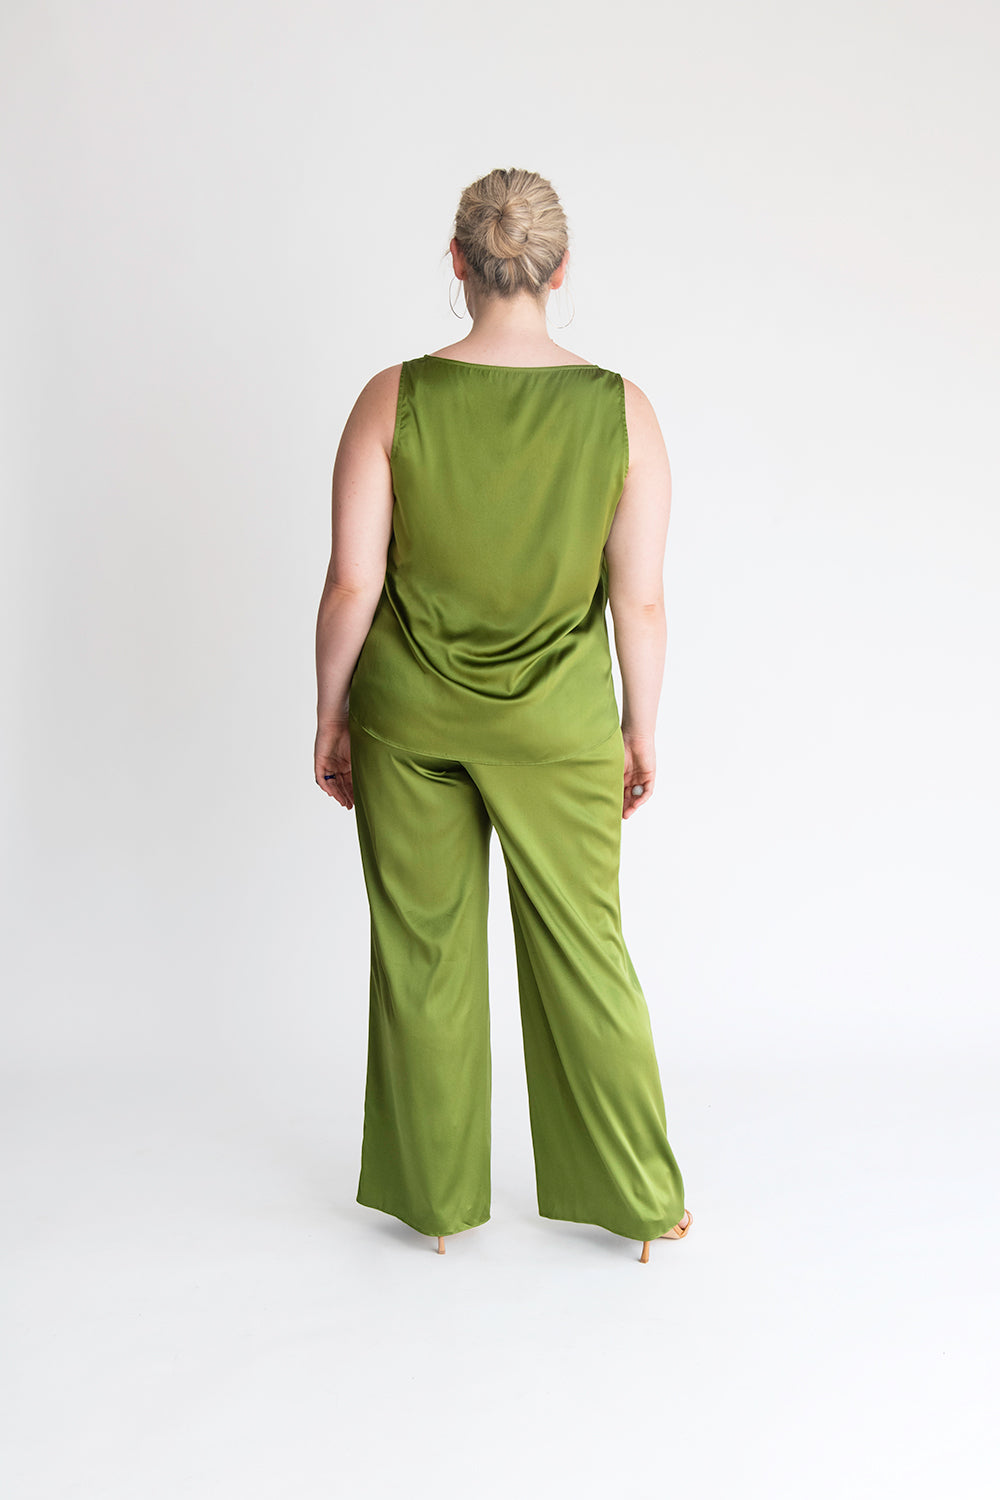 Green palazzo pants with top